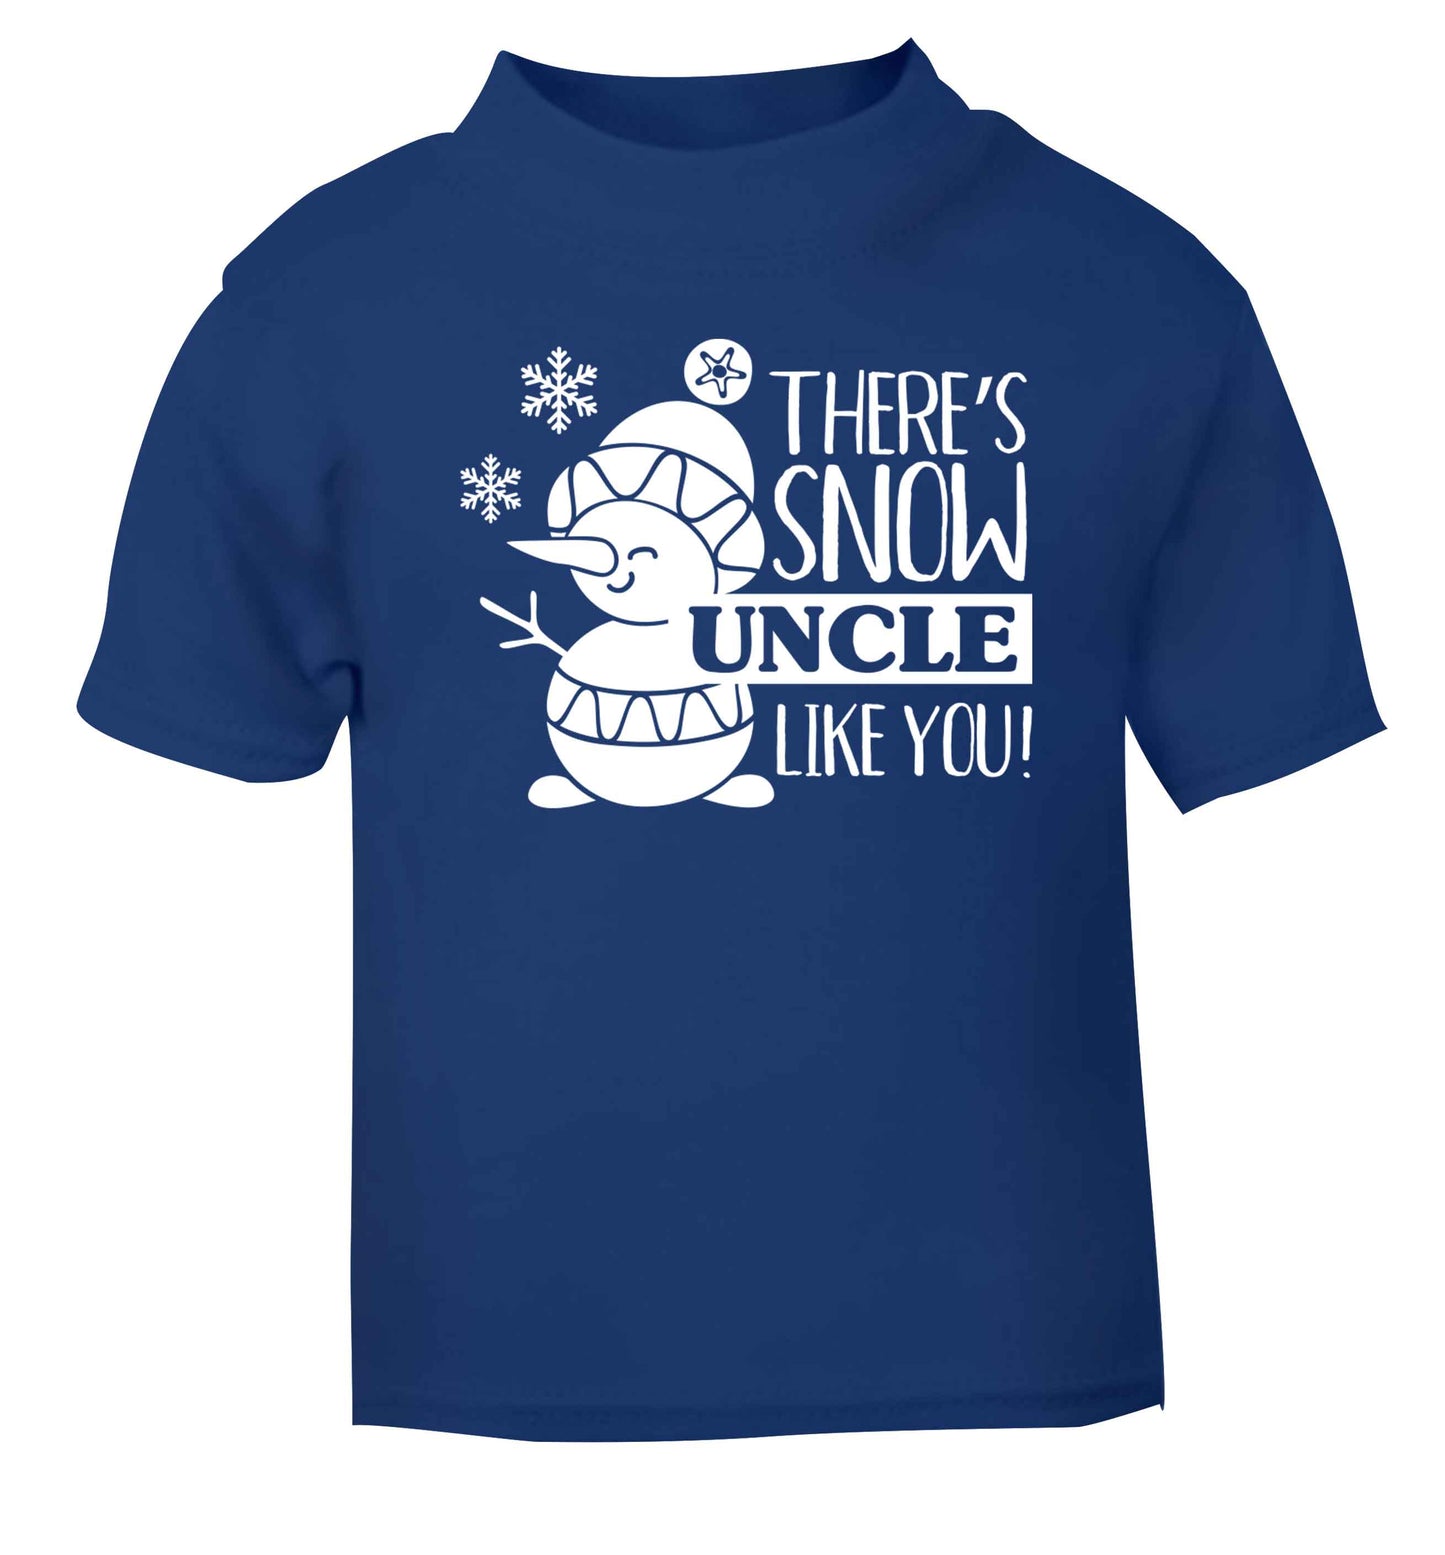 There's snow uncle like you blue baby toddler Tshirt 2 Years